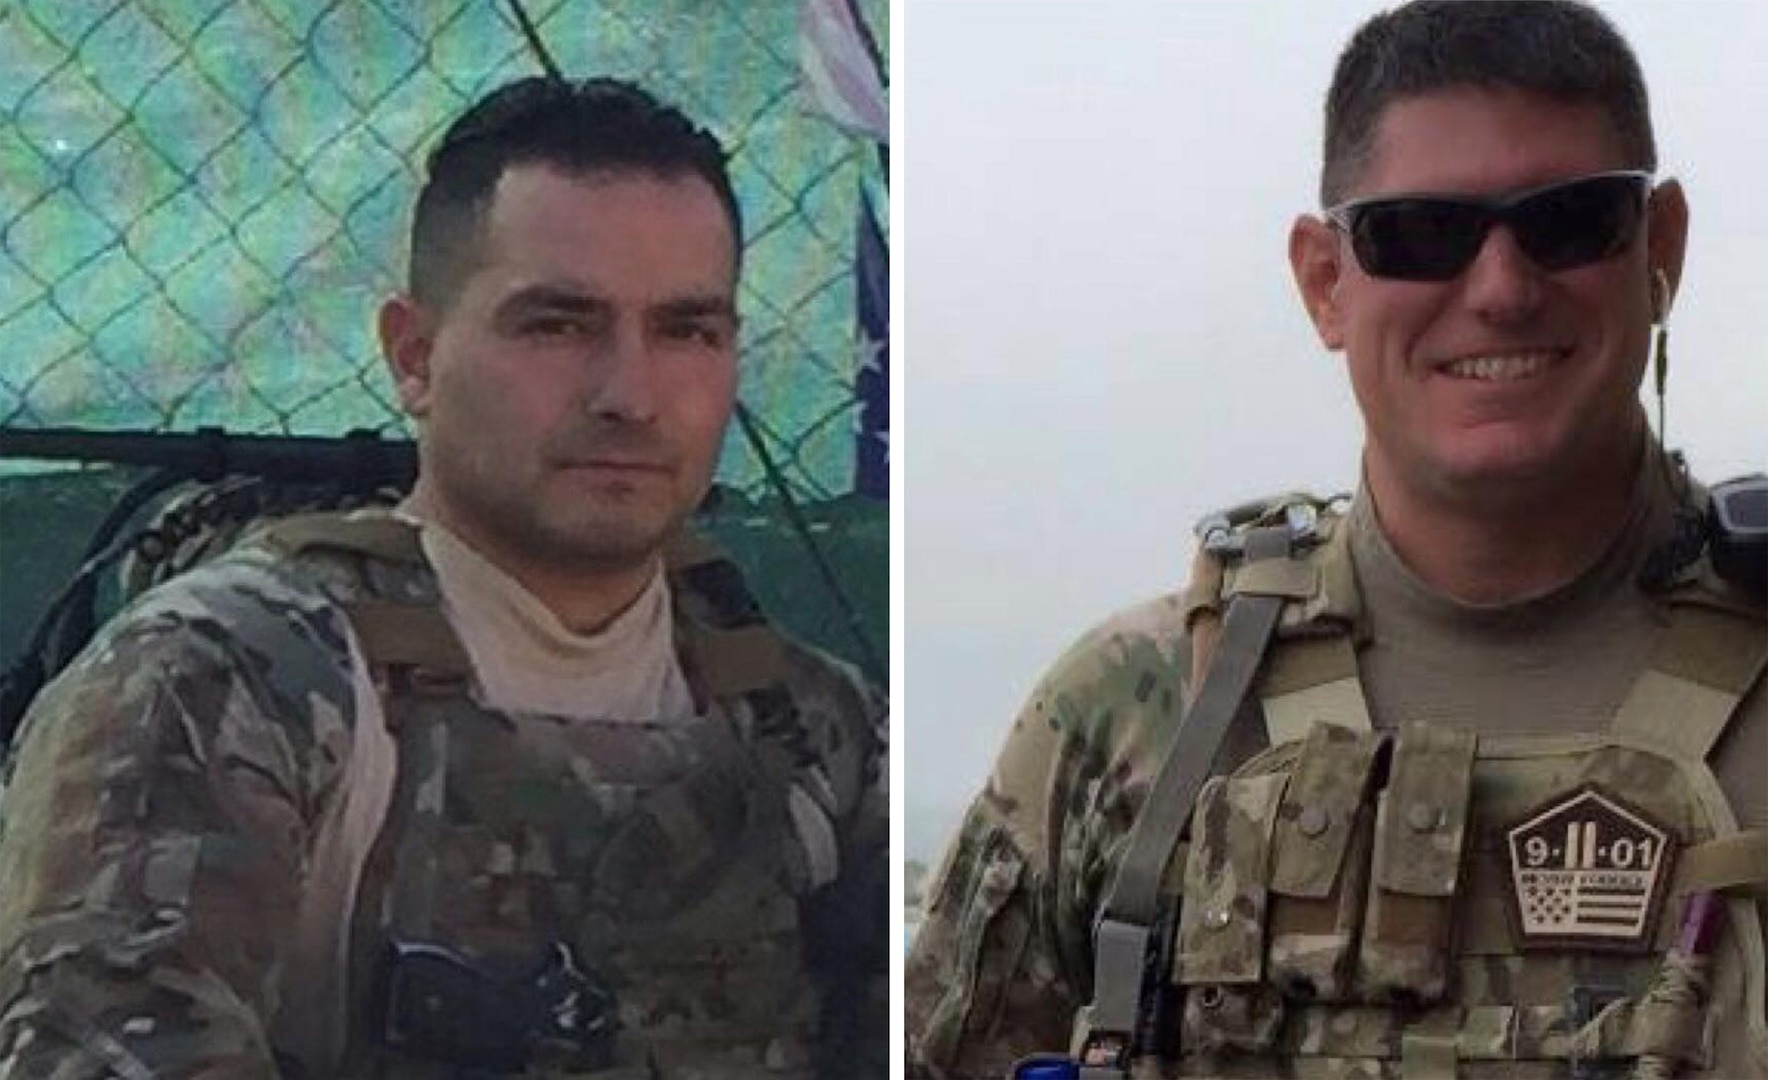 Staff Sgt. Louis Bonacasa, left, and Tech Sgt. Joseph Lemm, both members of the New York Air National Guard's 105th Airlift Wing's 105th Base Defense Squadron, killed in action in Afghanistan on Dec. 21, 2015, have been awarded the Bronze Star with V for Valor for their actions that day. The two Air Guardsmen were honored for giving their lives to save other Airmen from a suicide bomber. Four other Airmen died alongside them.